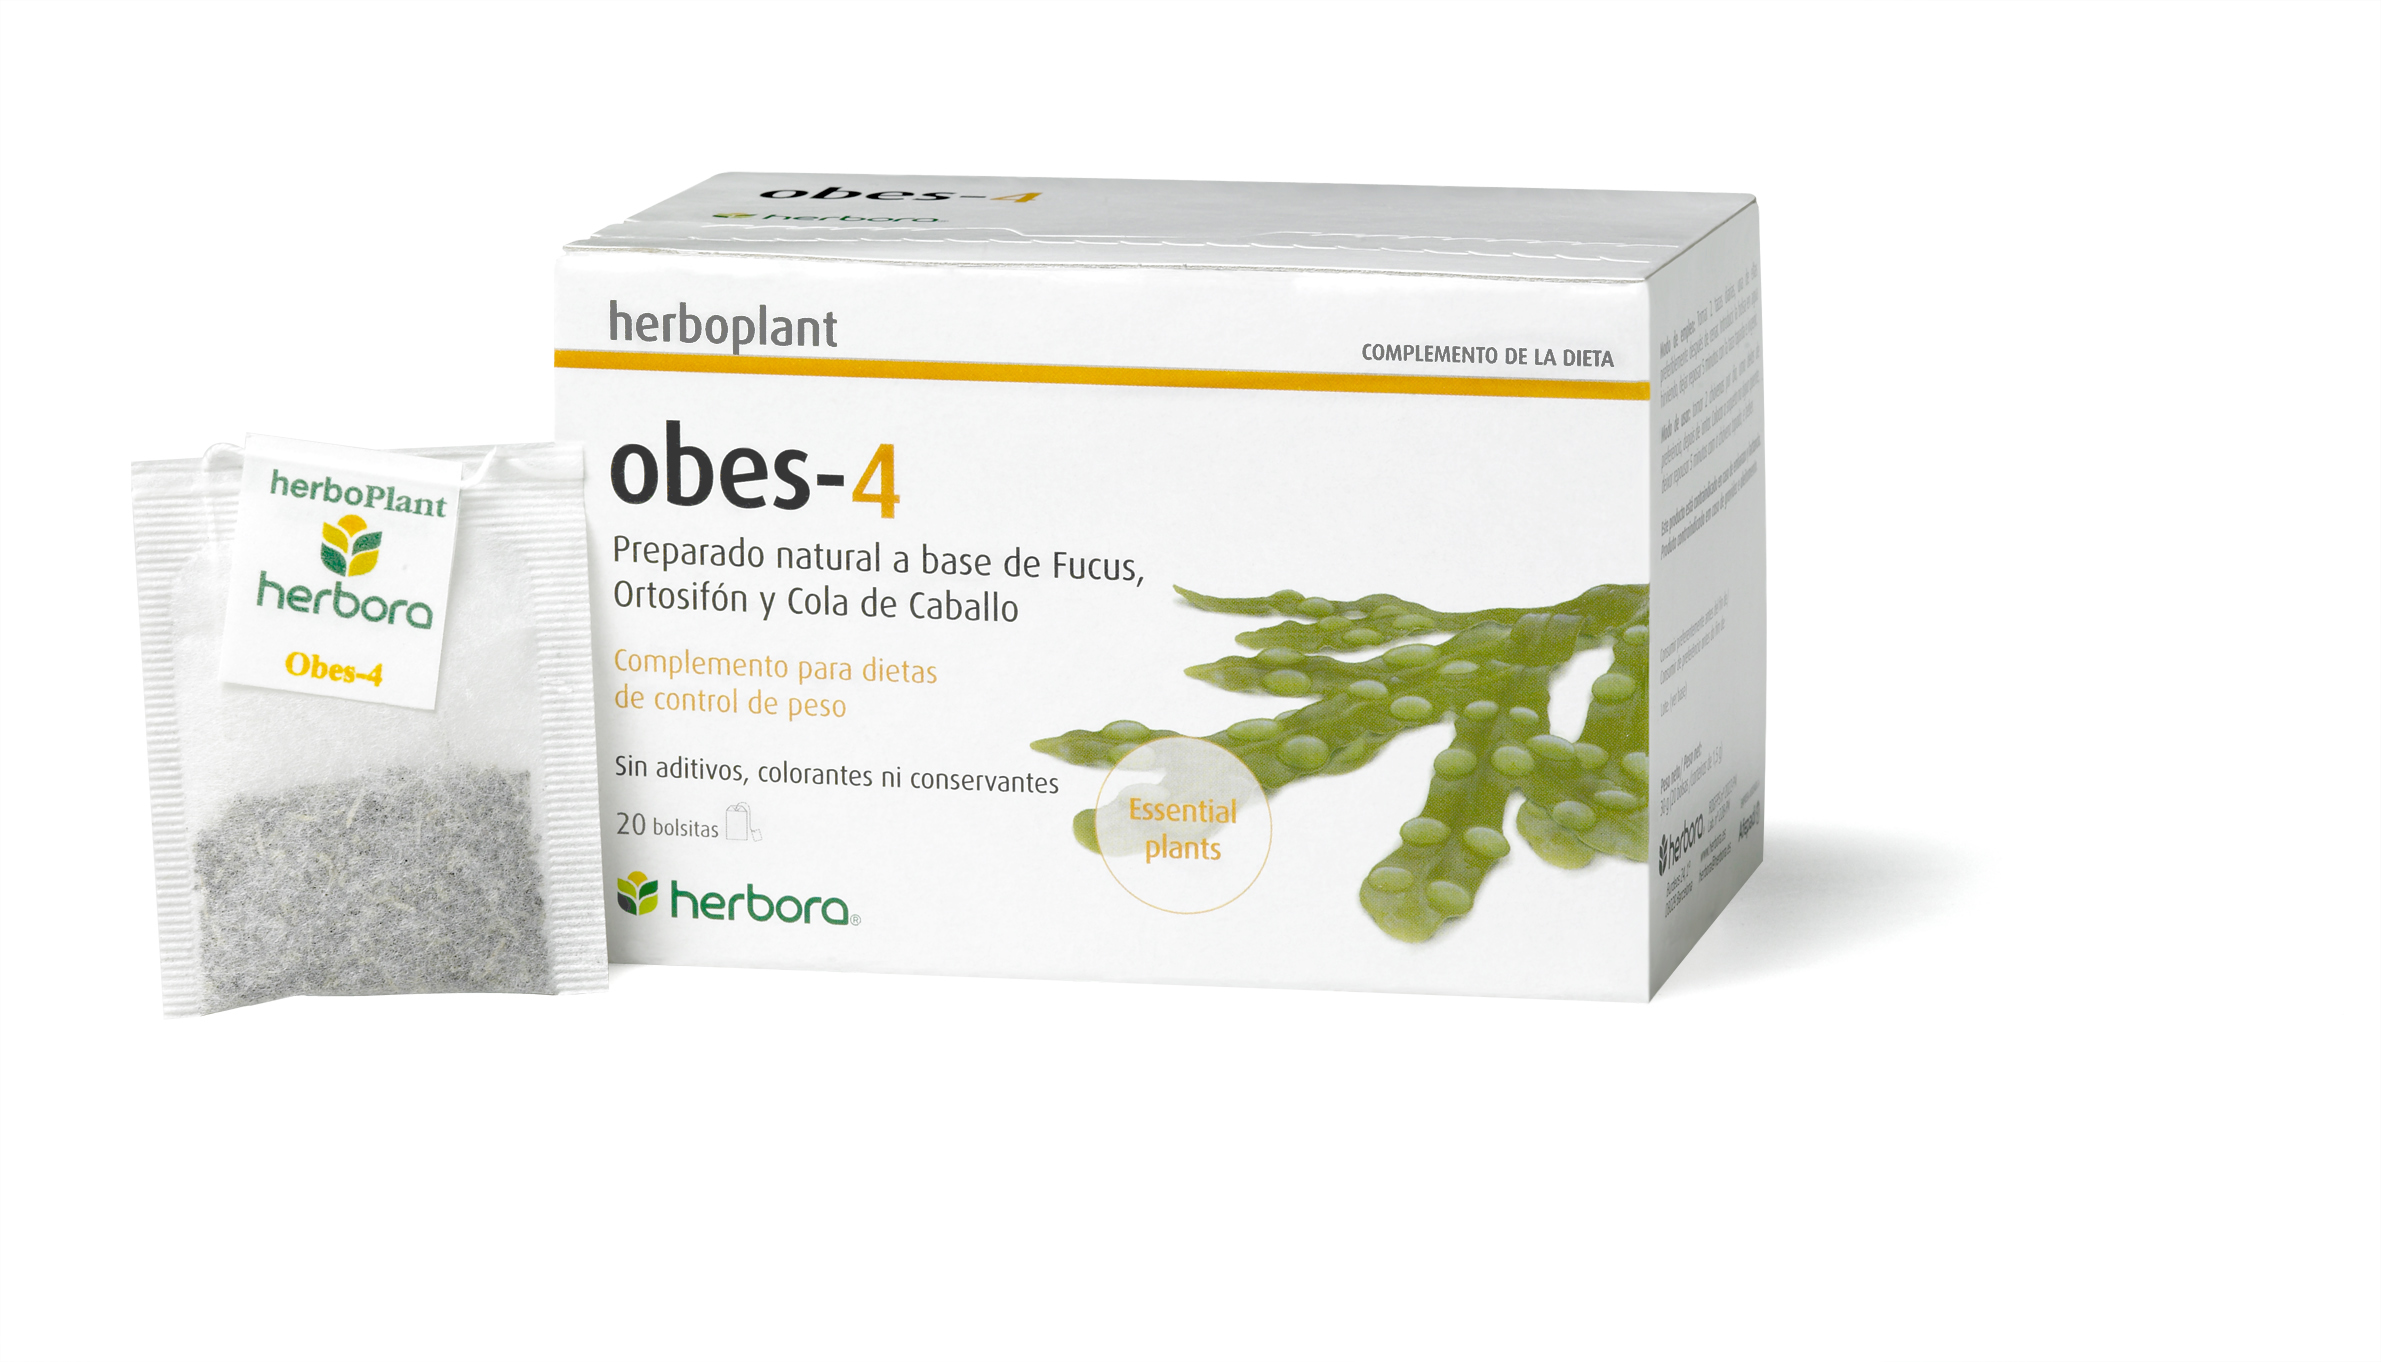 Obes-4